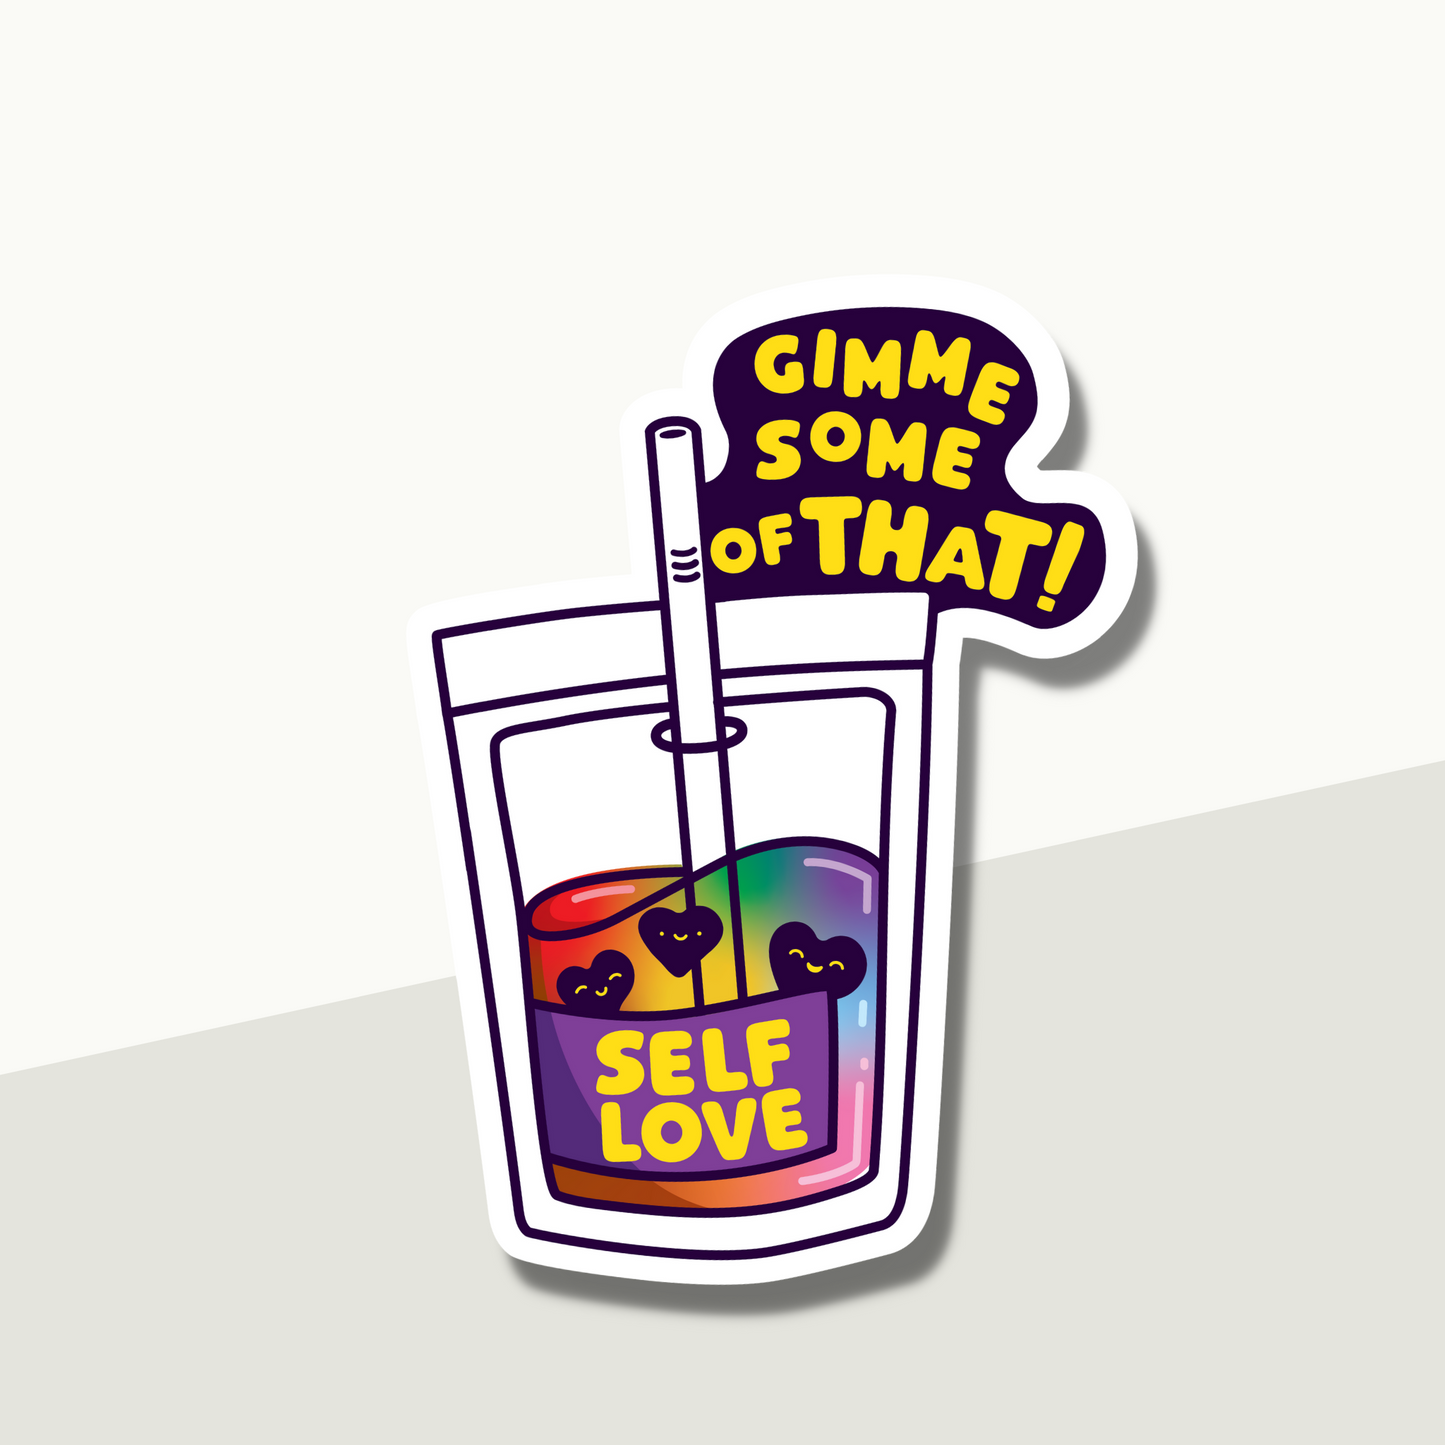 Gimme Some Of That Vinyl Sticker [Pride Collection]